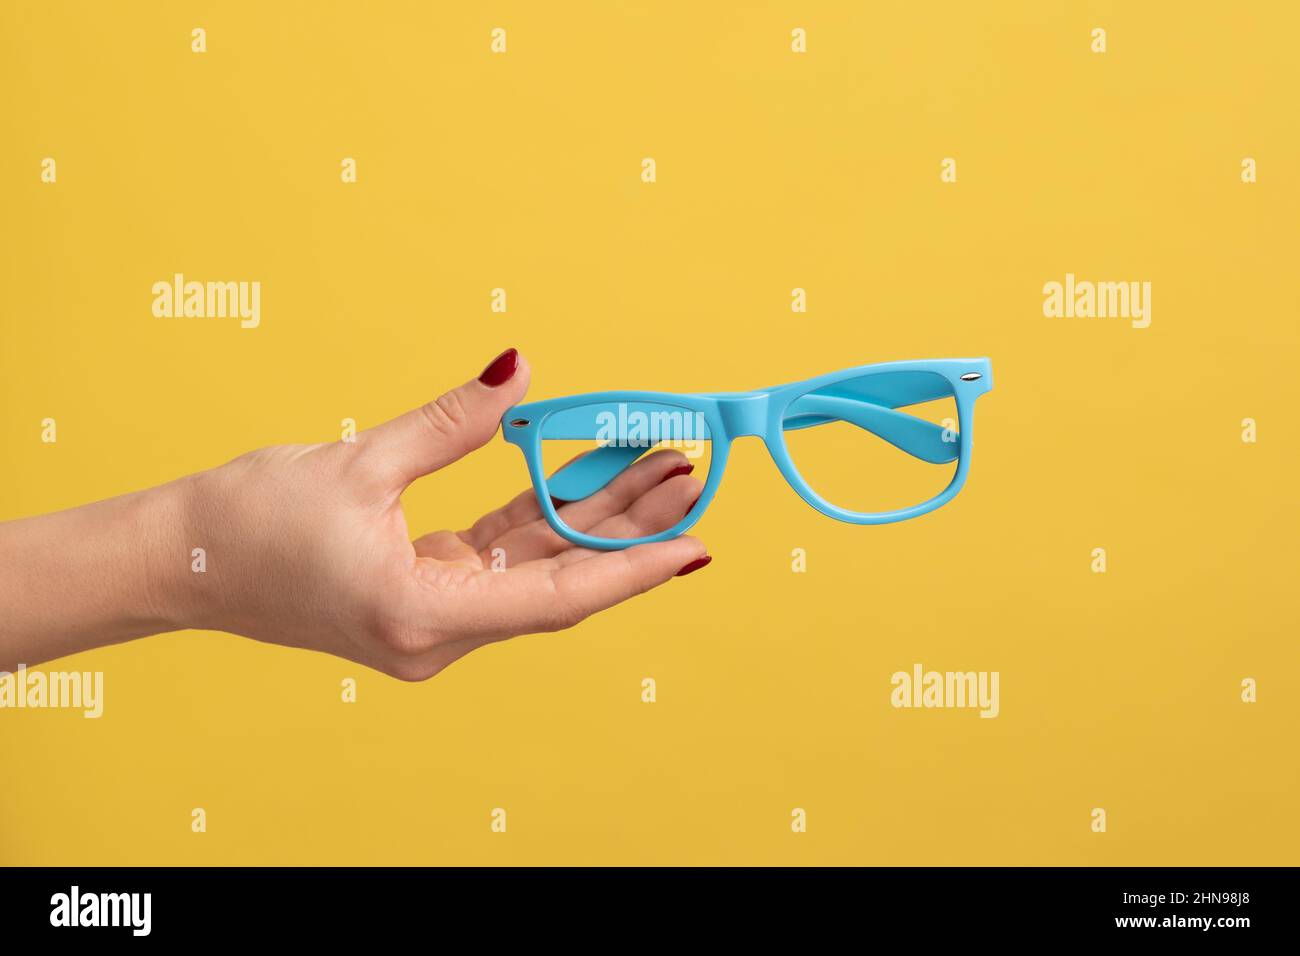 Profile side view closeup of woman hand holding and showing blue eyeglasses frame. Indoor studio shot isolated on yellow background. Stock Photo